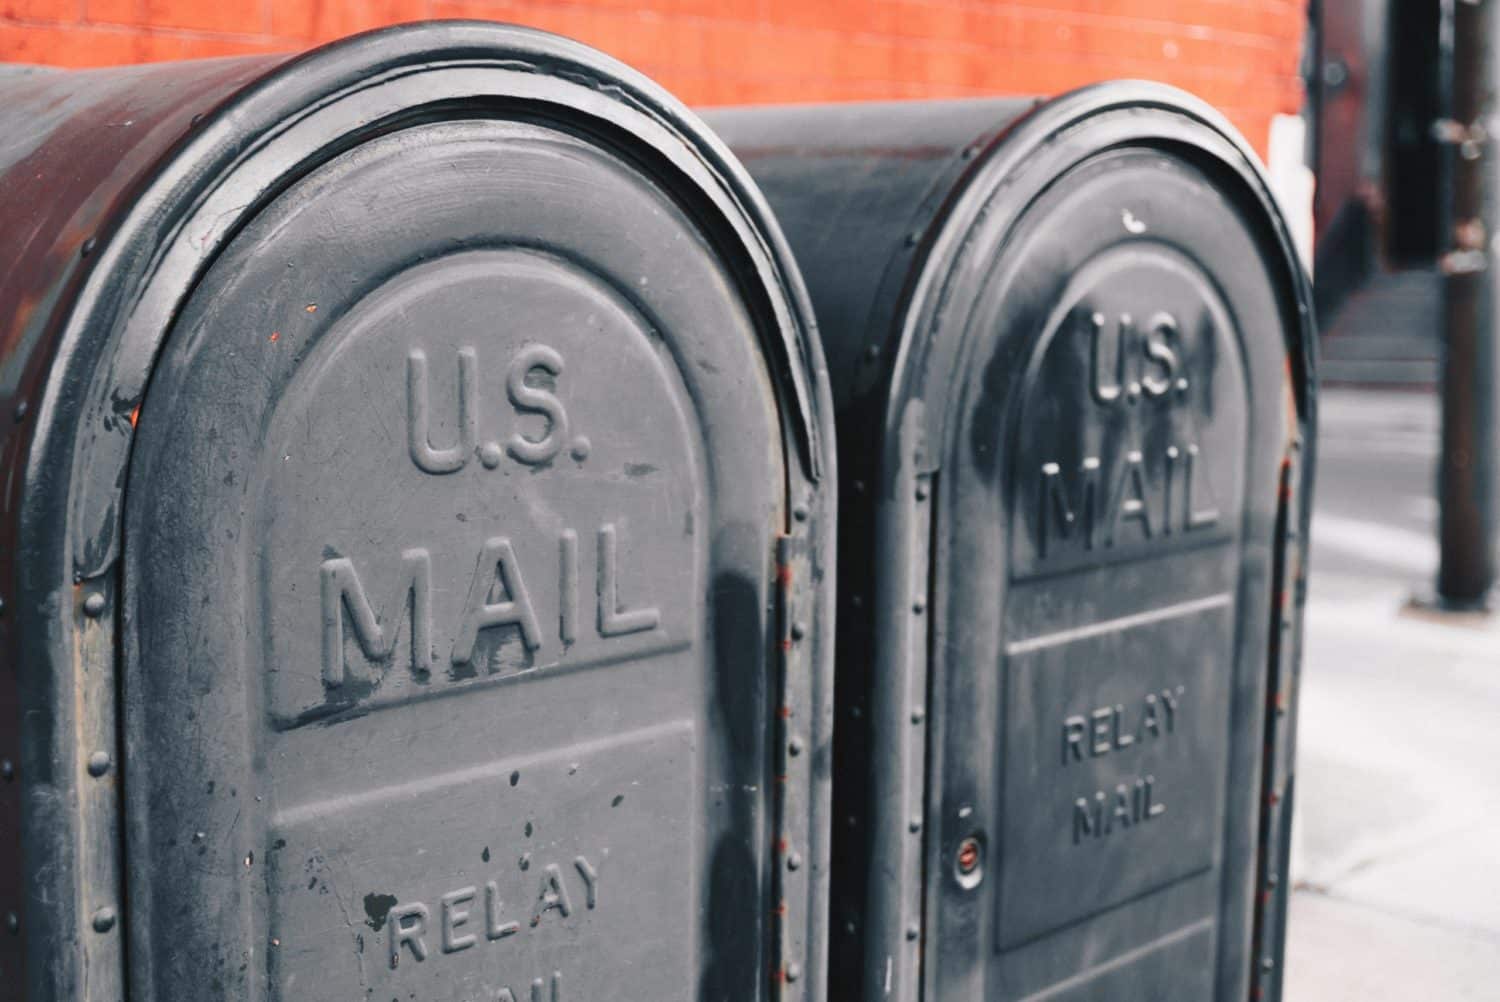 Mailbox Plus: virtual mailbox services for businesses with up to 50 items per month